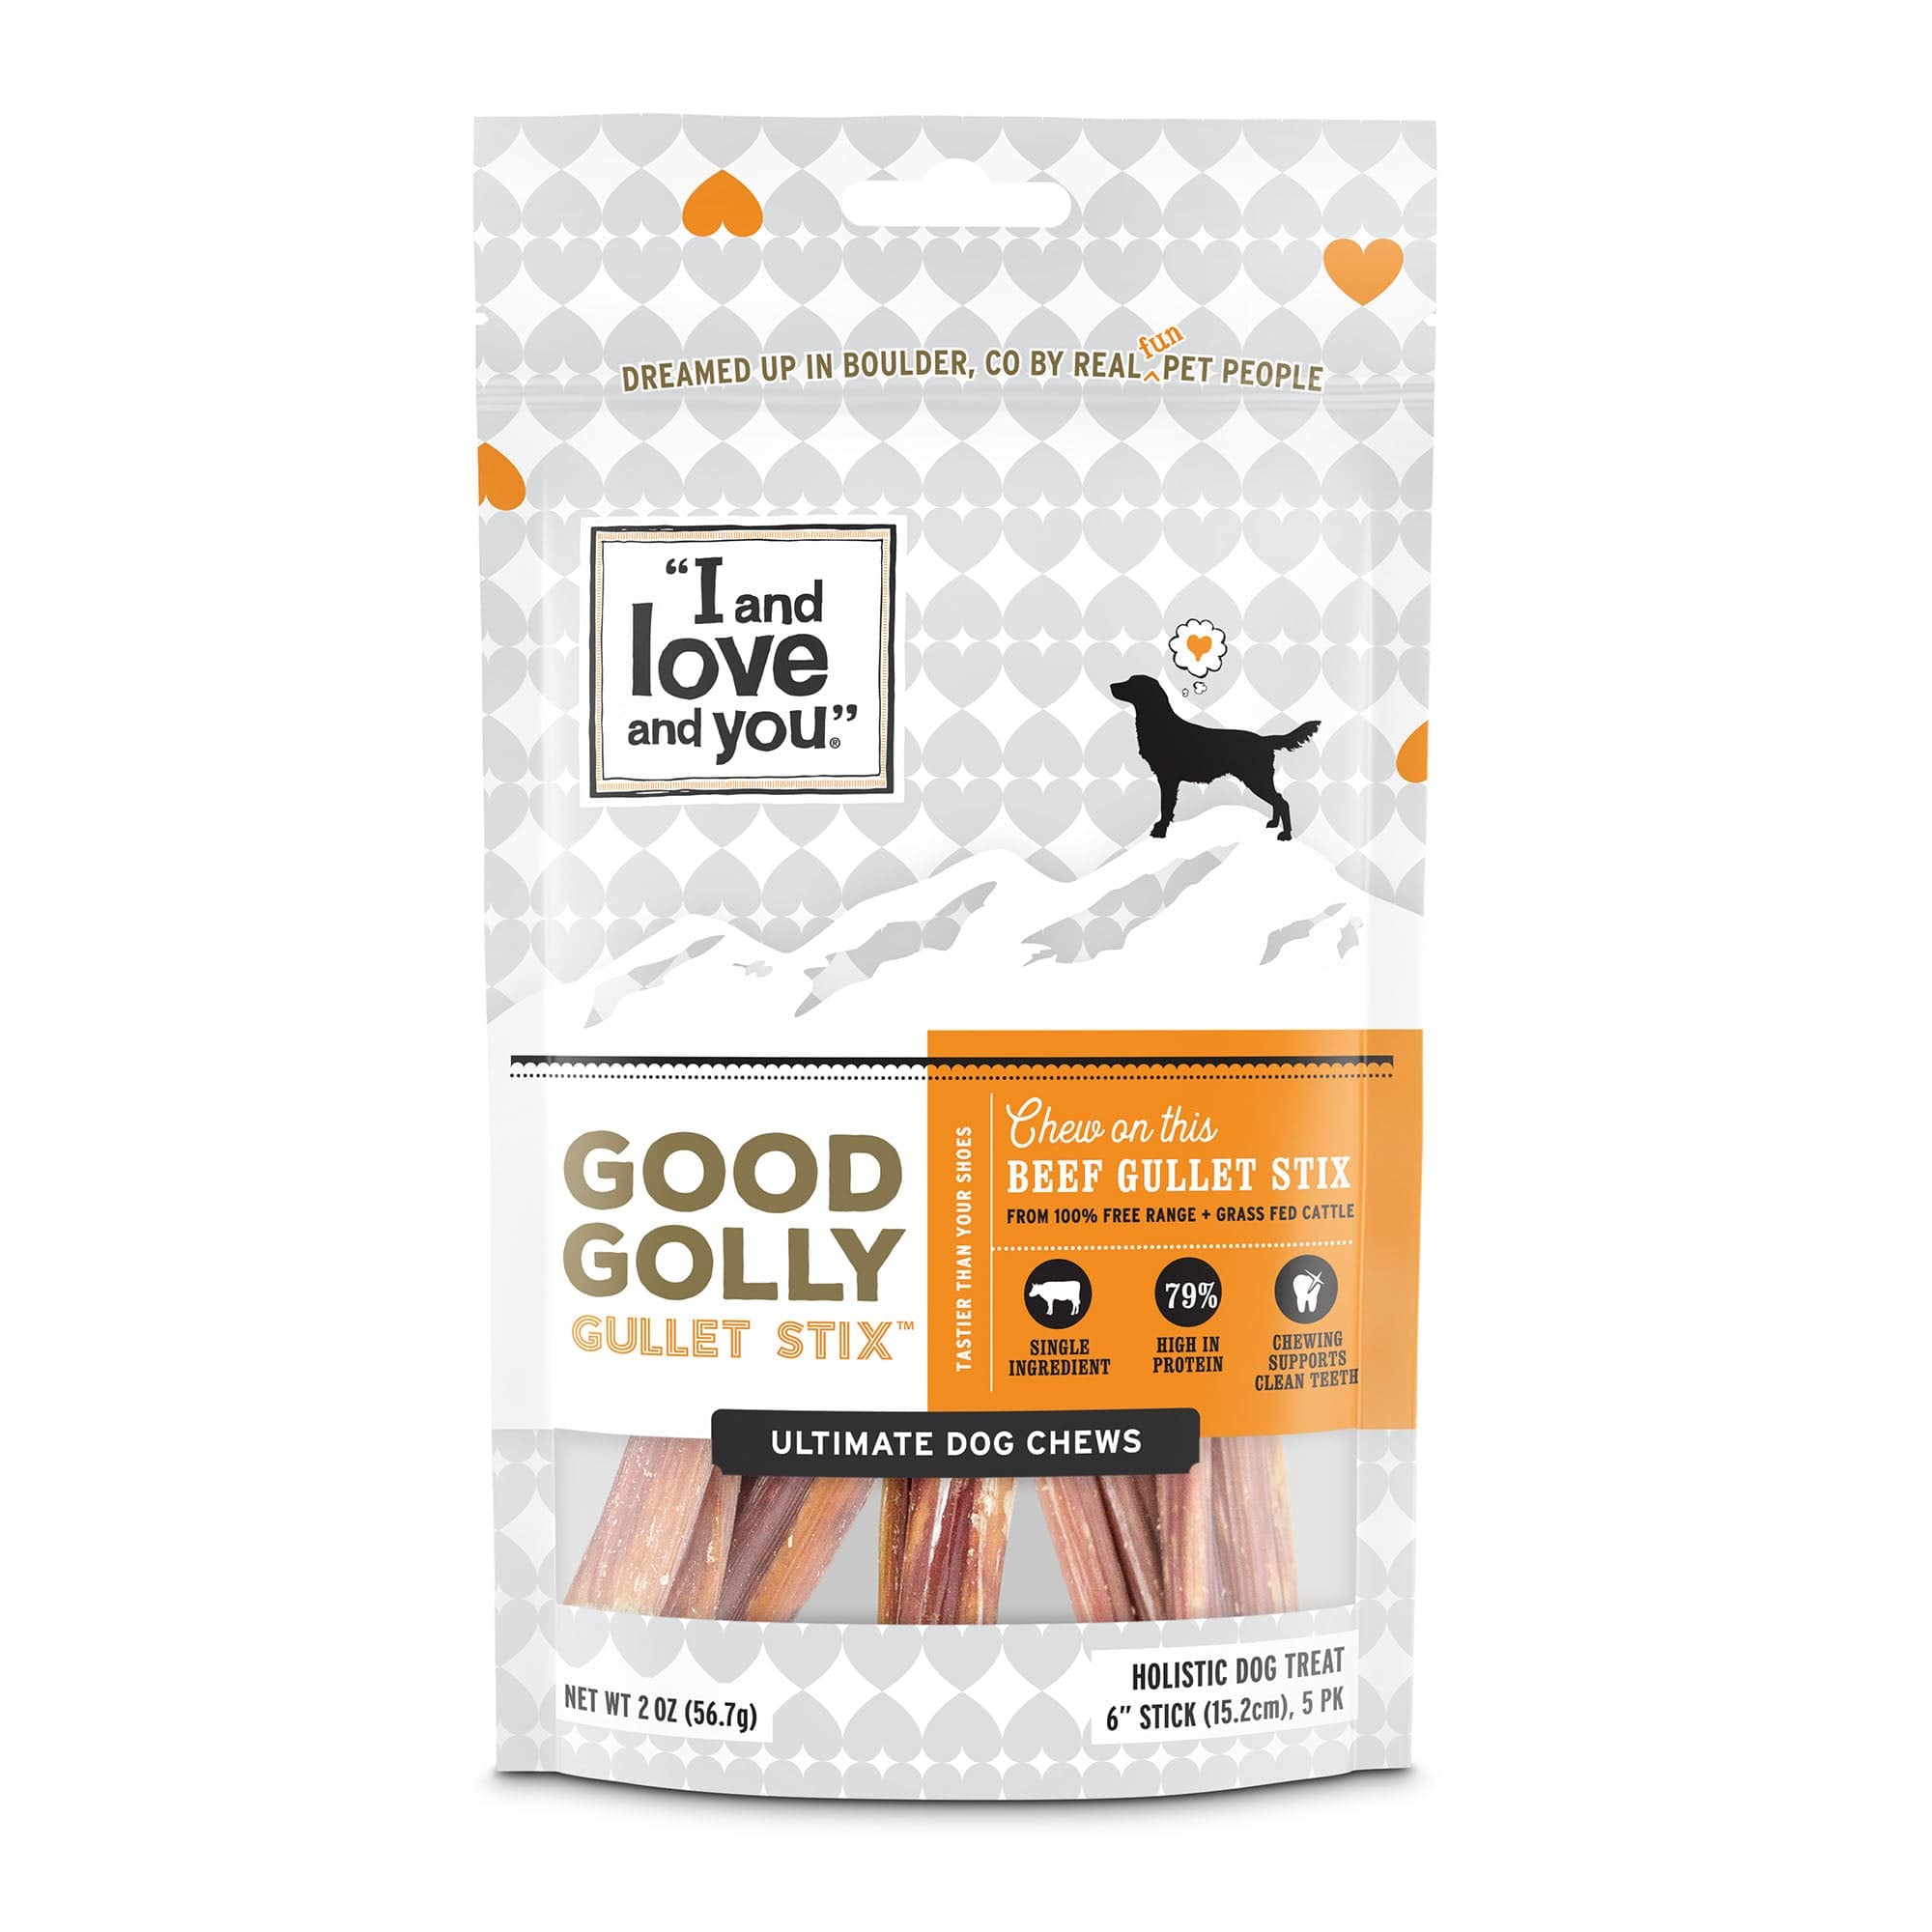 Good Golly Gullet Stix package with dog chews and silhouette of a dog, label on a dog chew, and logo close-up.